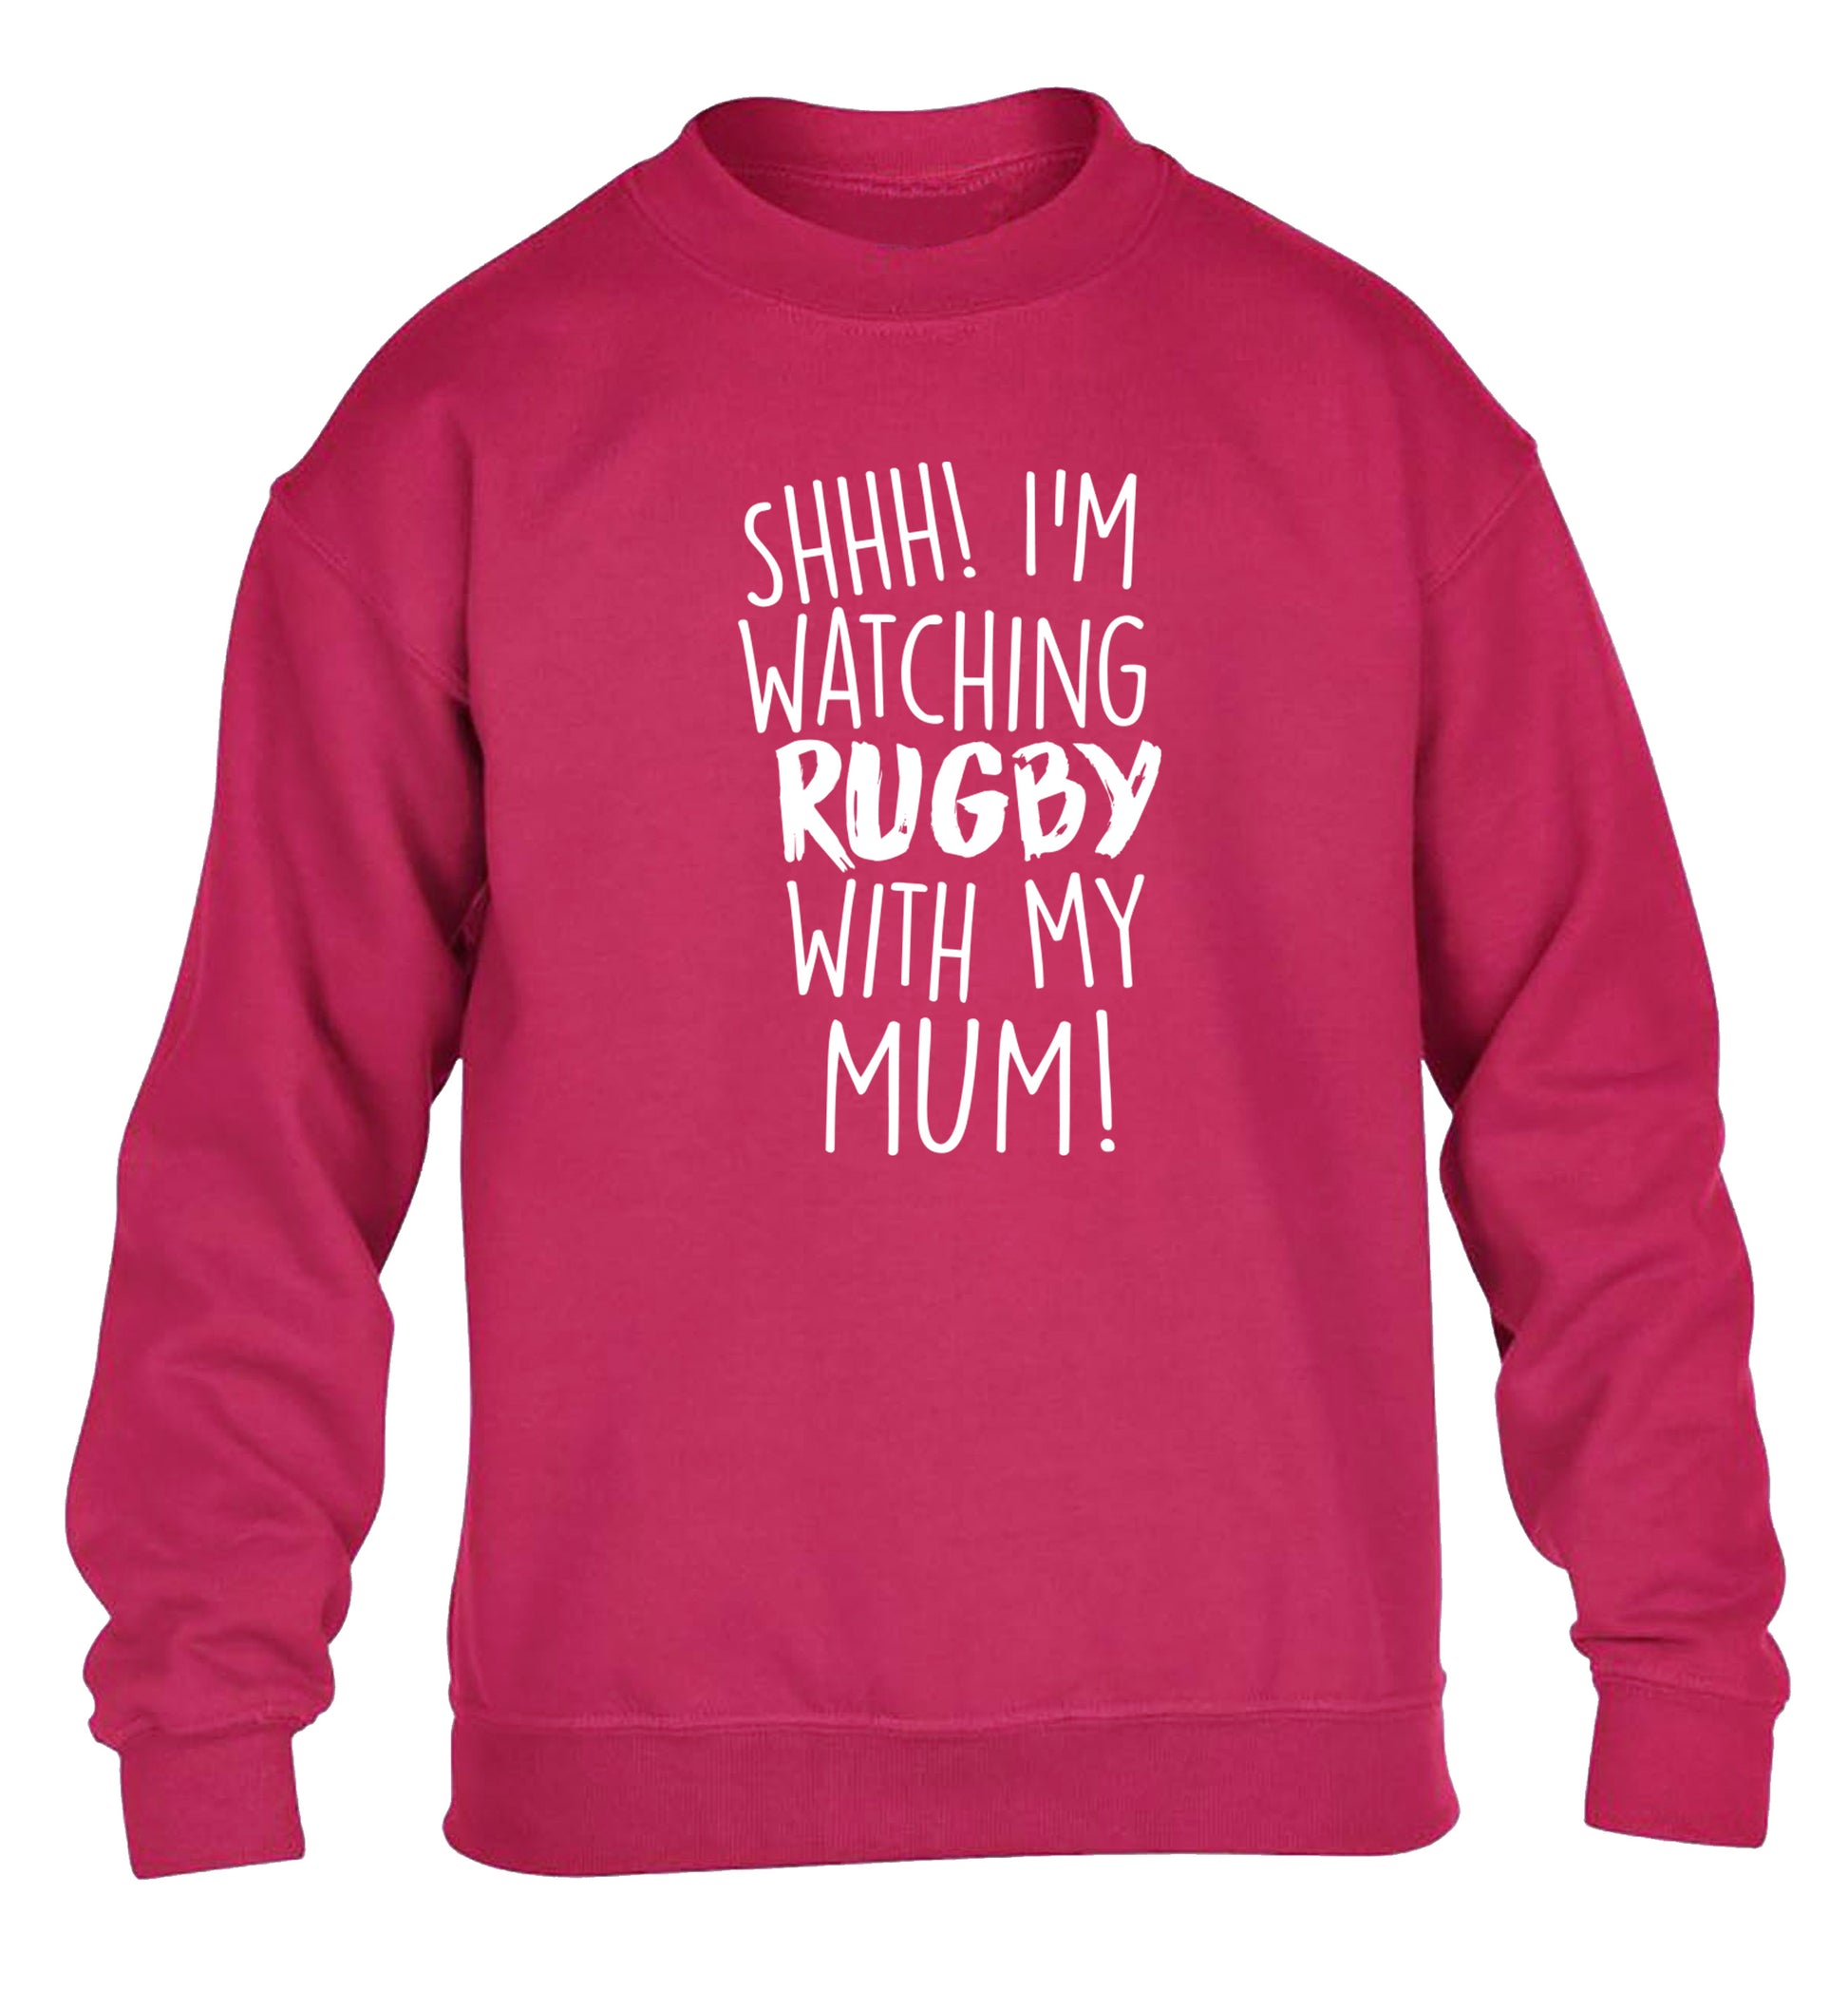 Shh... I'm watching rugby with my mum children's pink sweater 12-13 Years